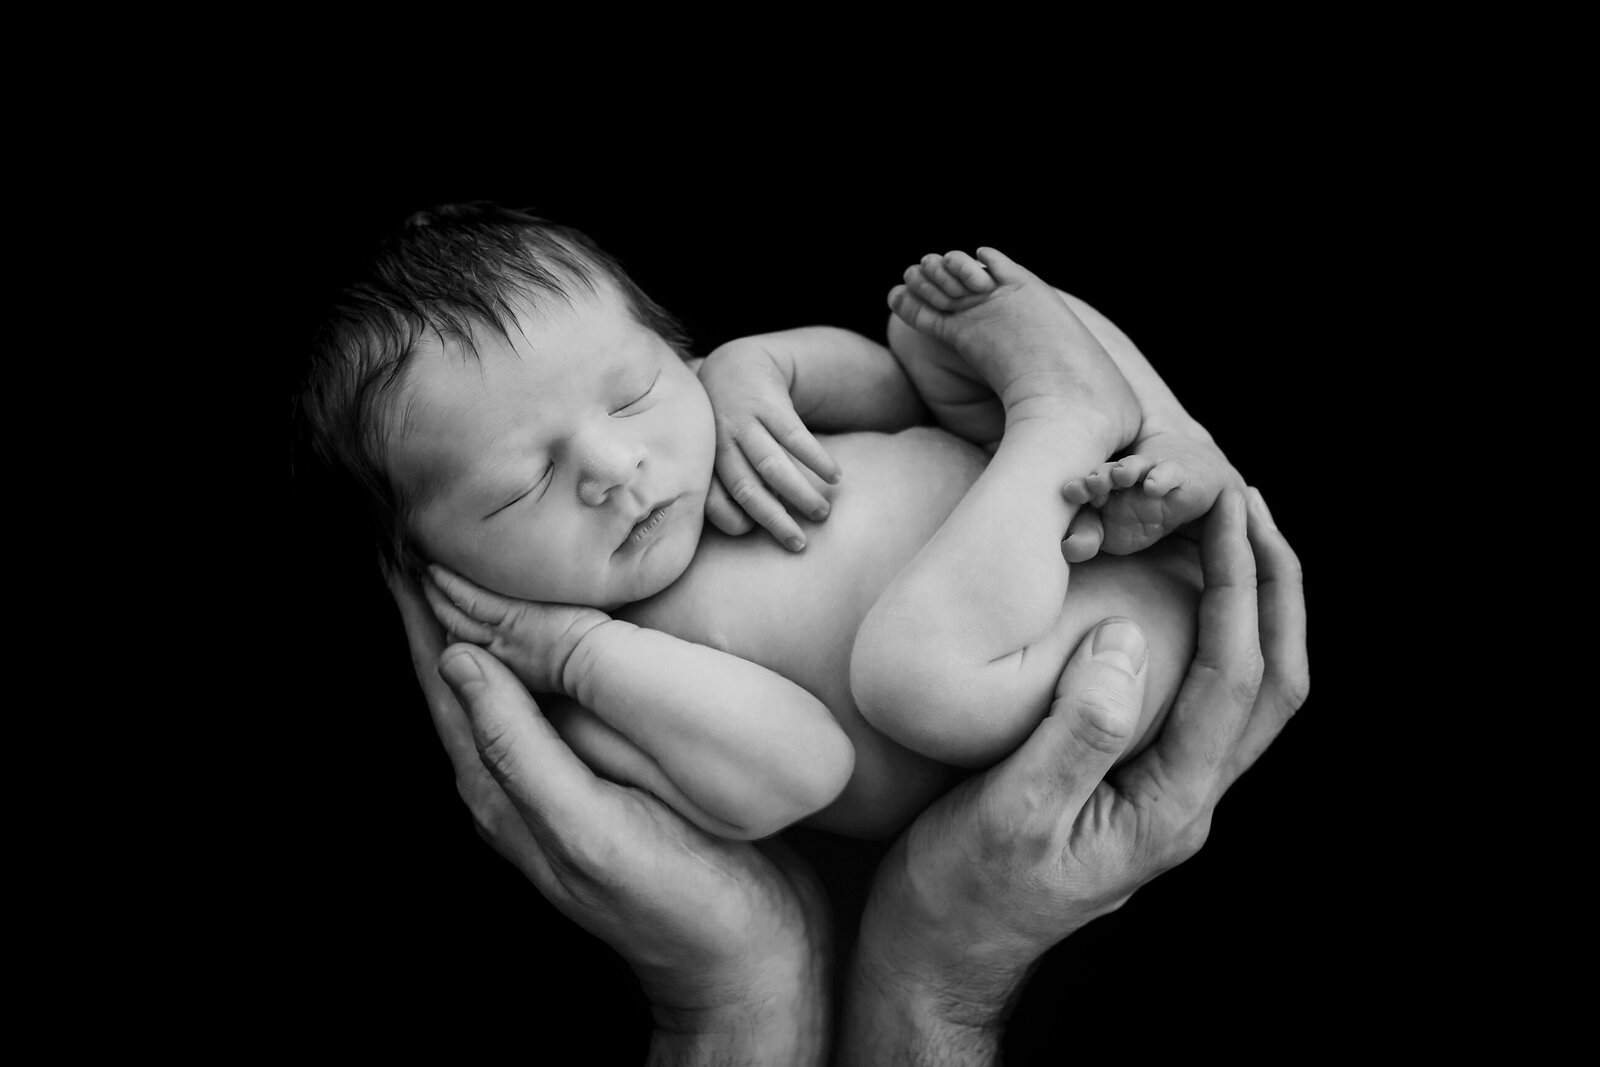 NBP-NEWBORN-BABY-HELD-IN-FATHERS-ARMS-0032